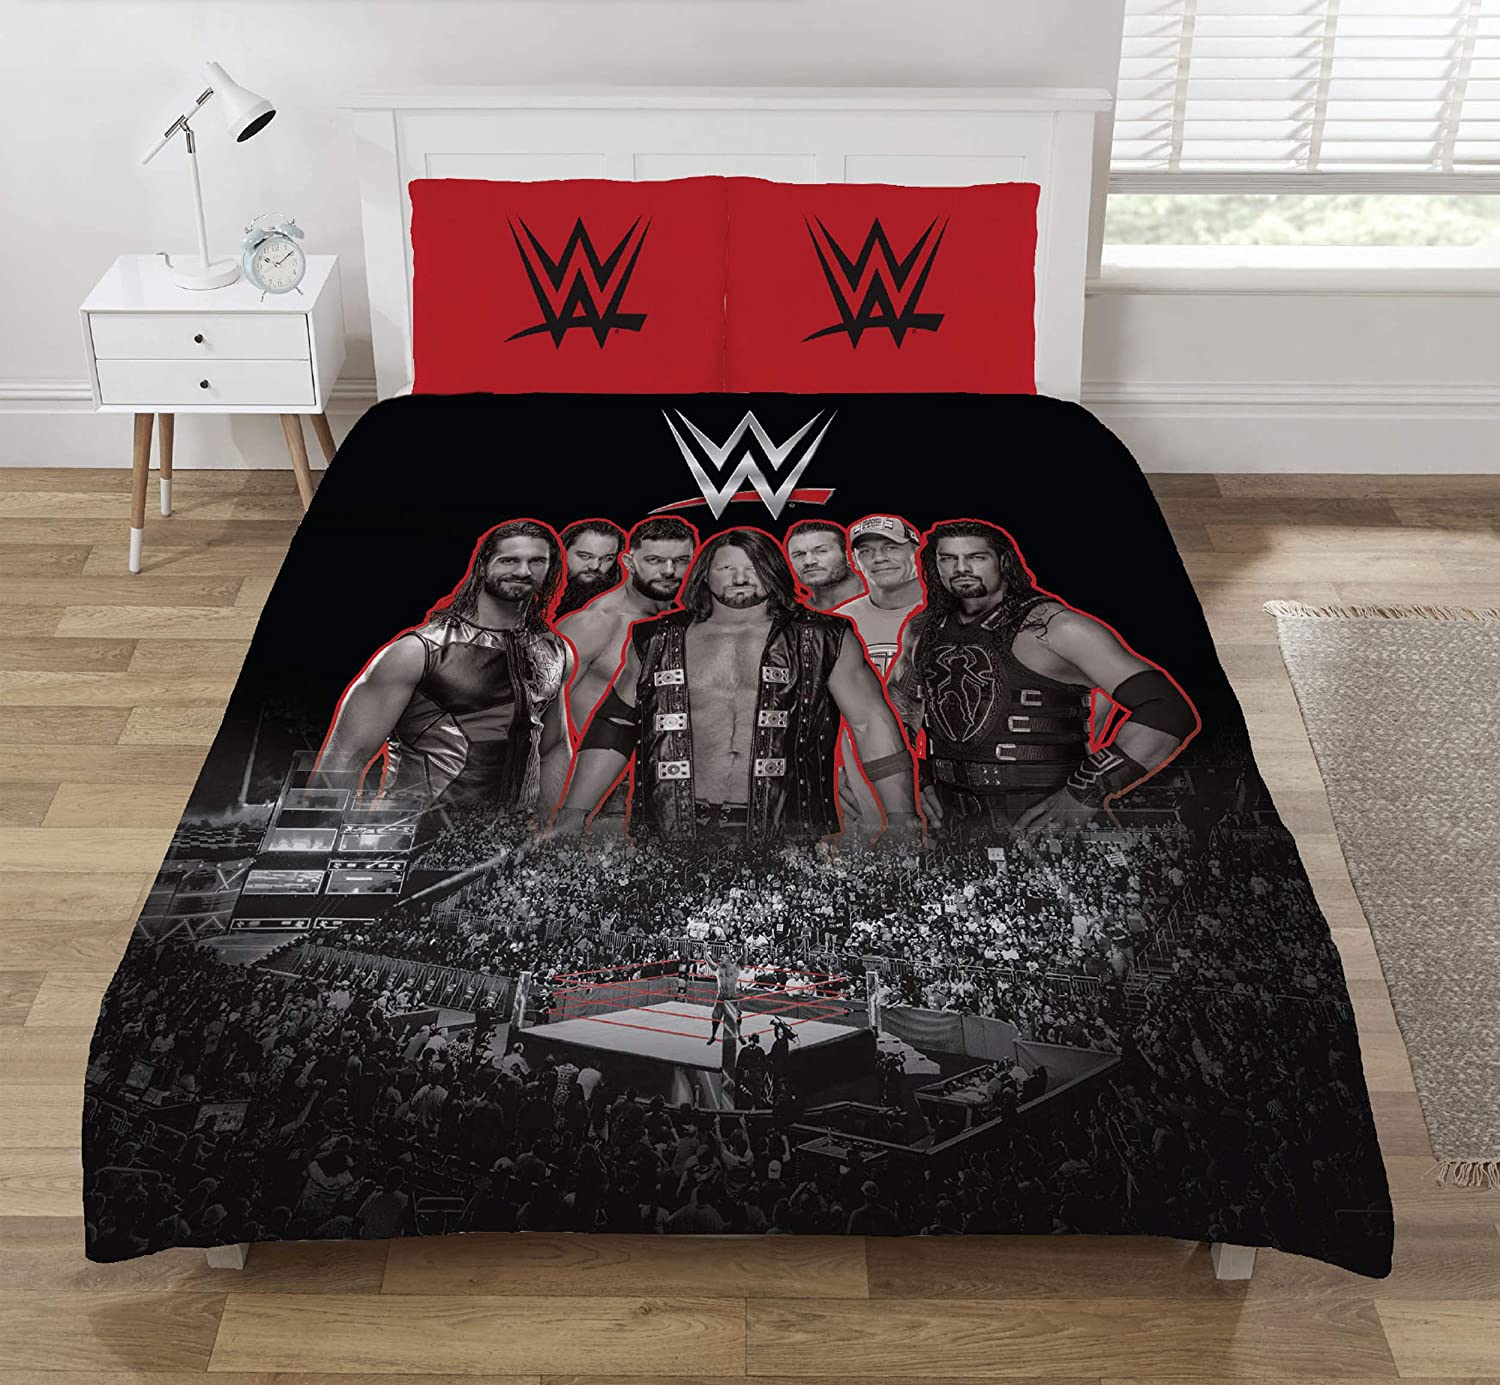 alexis atwood recommends Wwe Wrestling Ring Bedroom